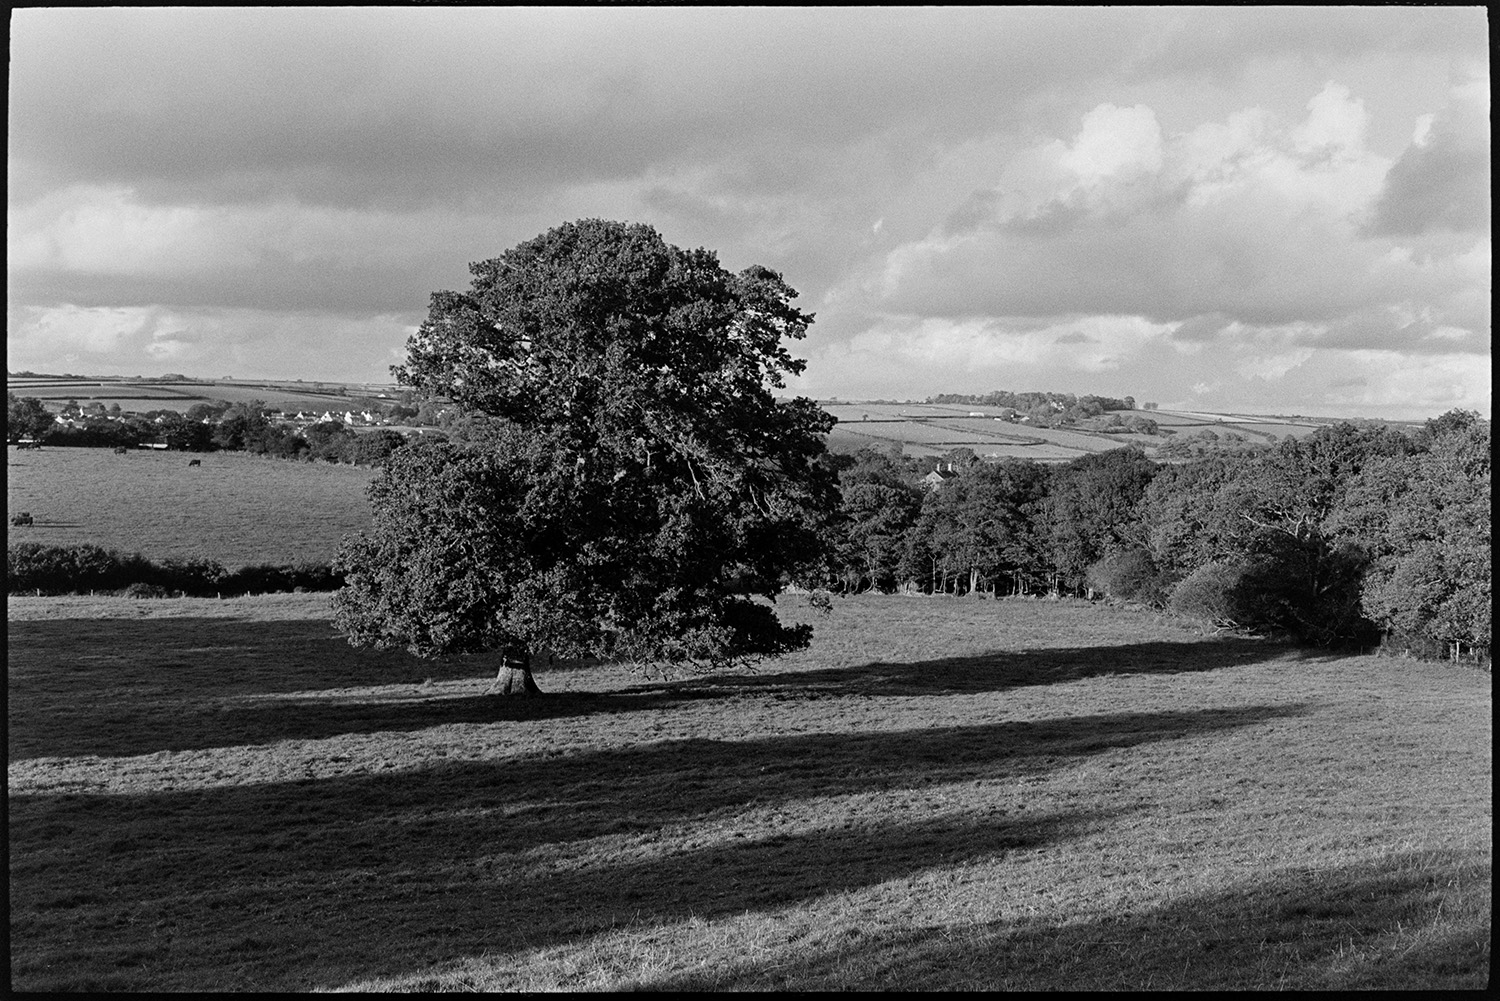 Landscape with oak tree and shadows. 
[An oak tree in a field near Dolton. The field is surrounded by woodland on one side and tree shadows are stretching across the field. More fields can be seen in the background.]